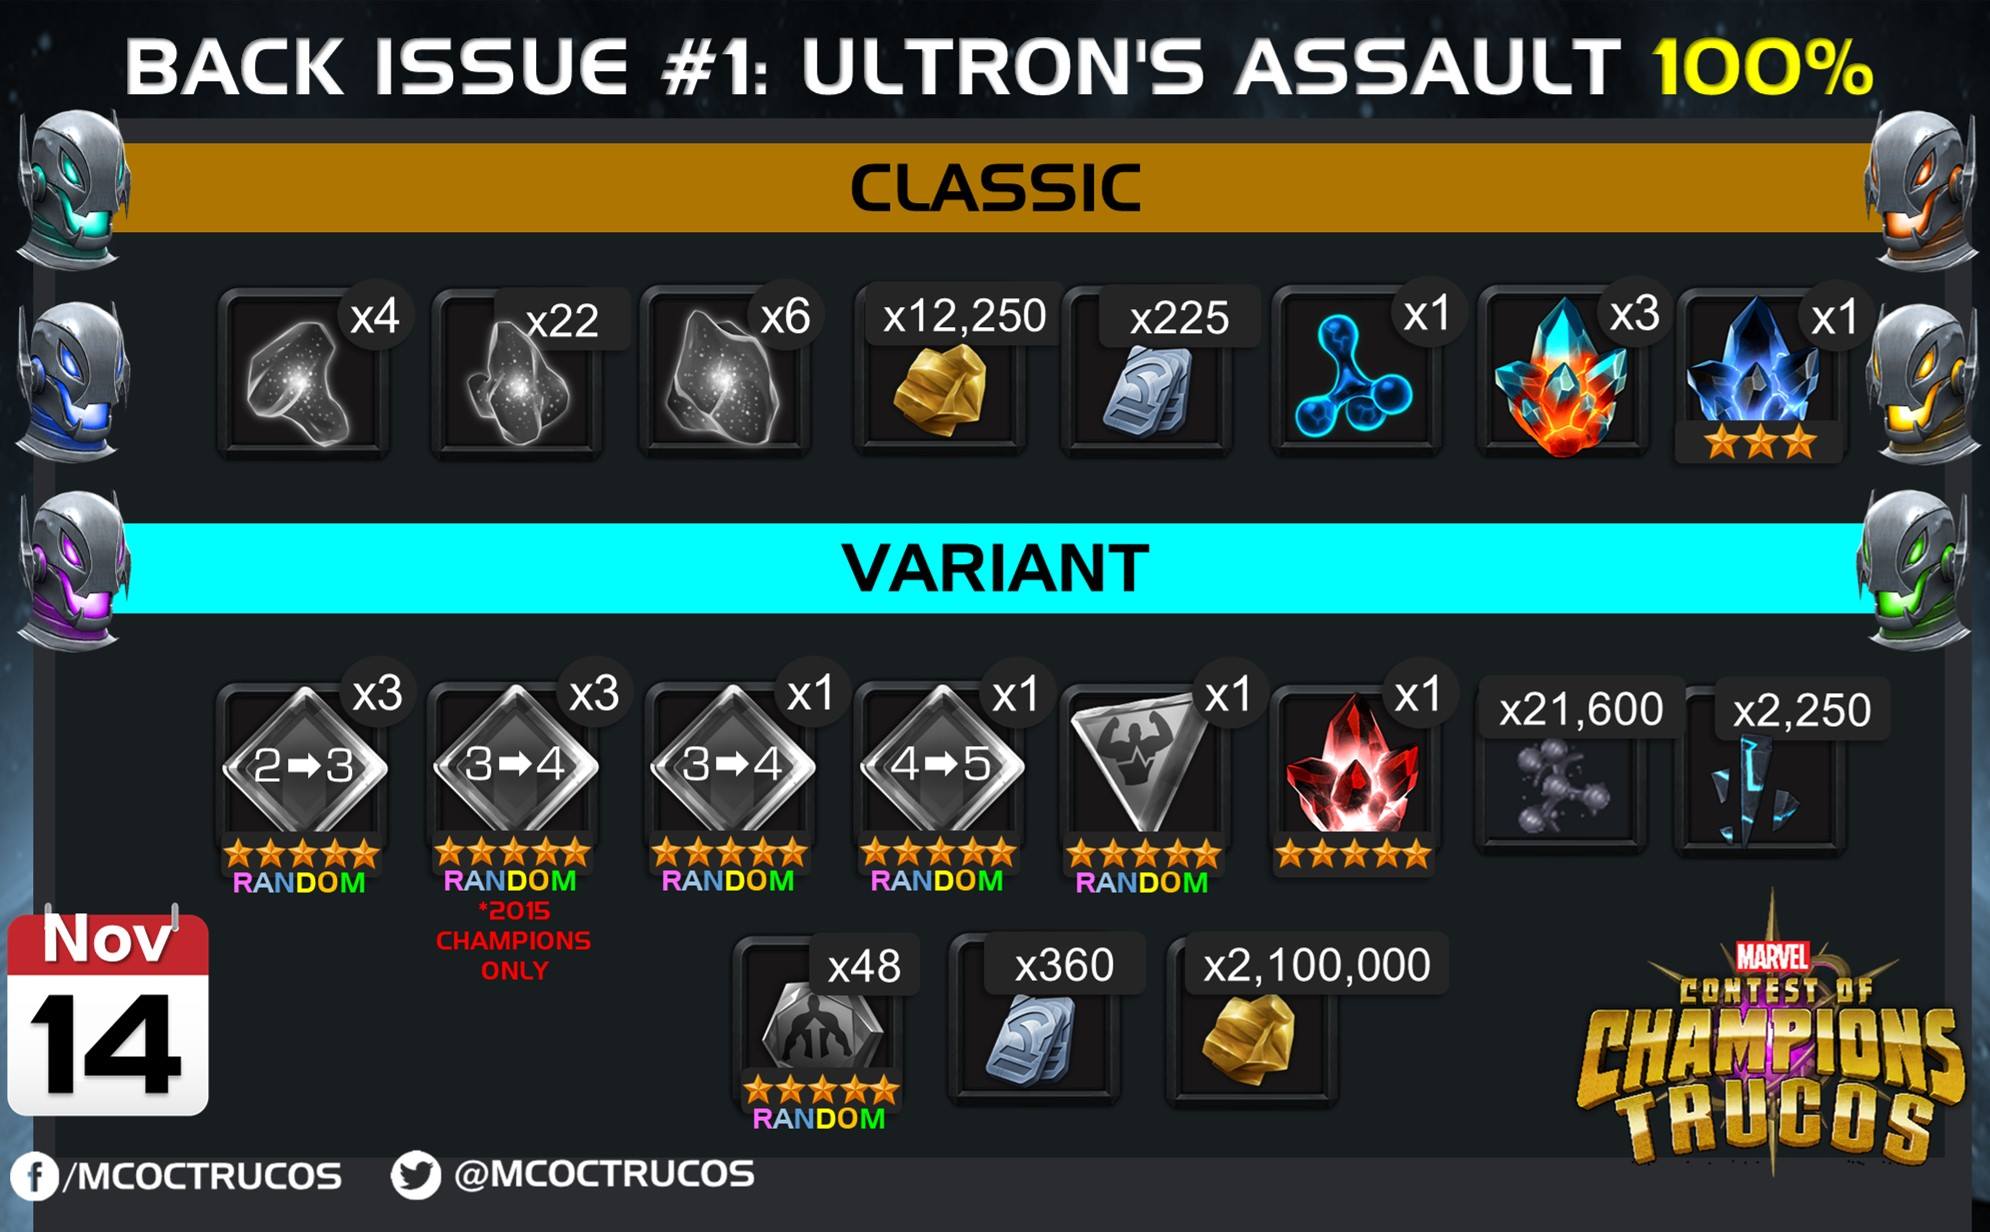 rewards for back issue ultron assault